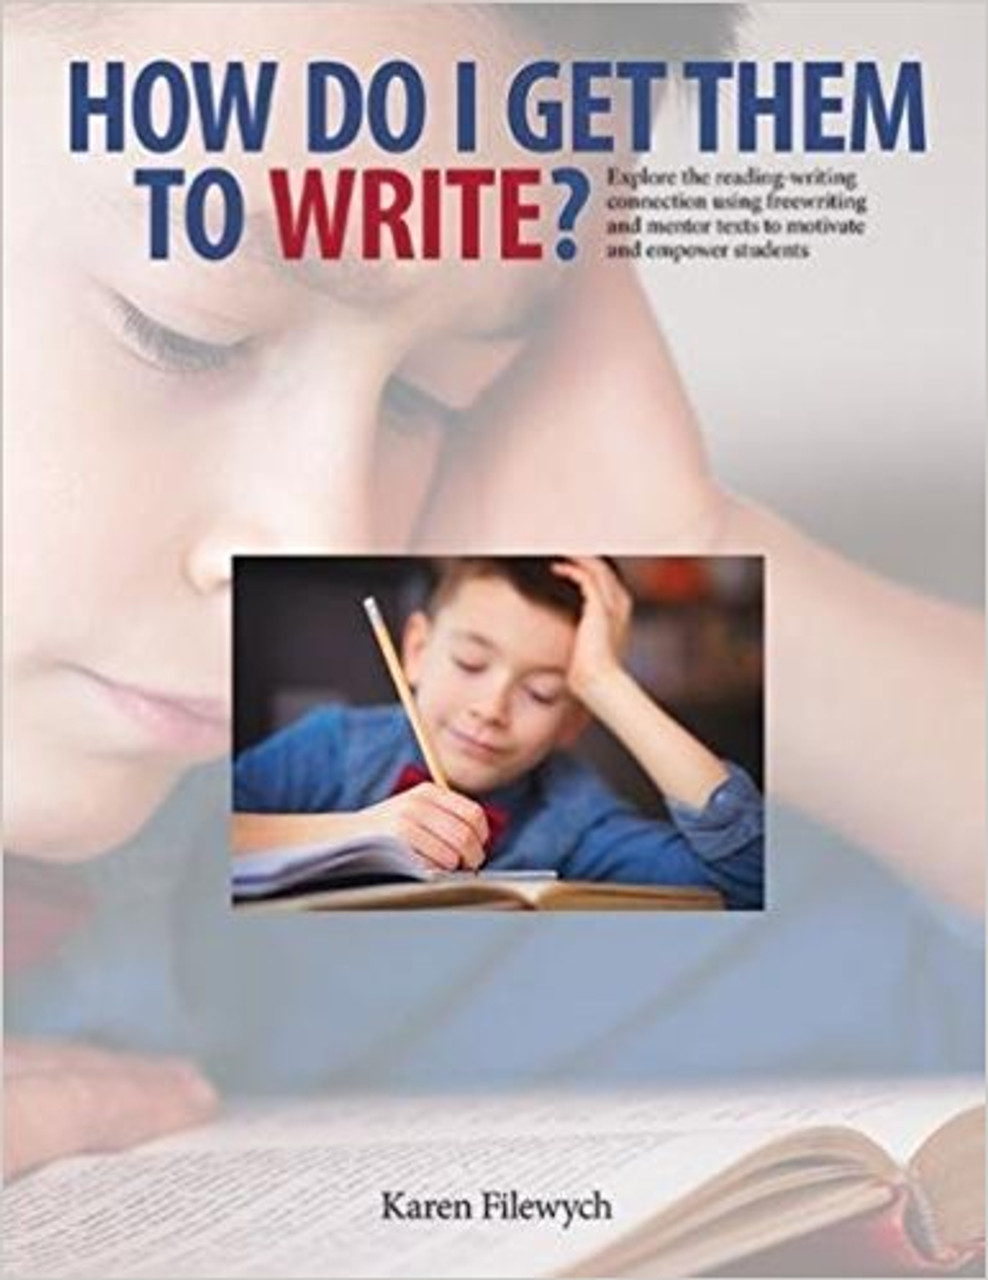 How Do I Get Them to Write?: Explore the Redaing-Writing Connection Using Freewriting and Mentor Texts to Motivate and Empower Students by Karen Filewych